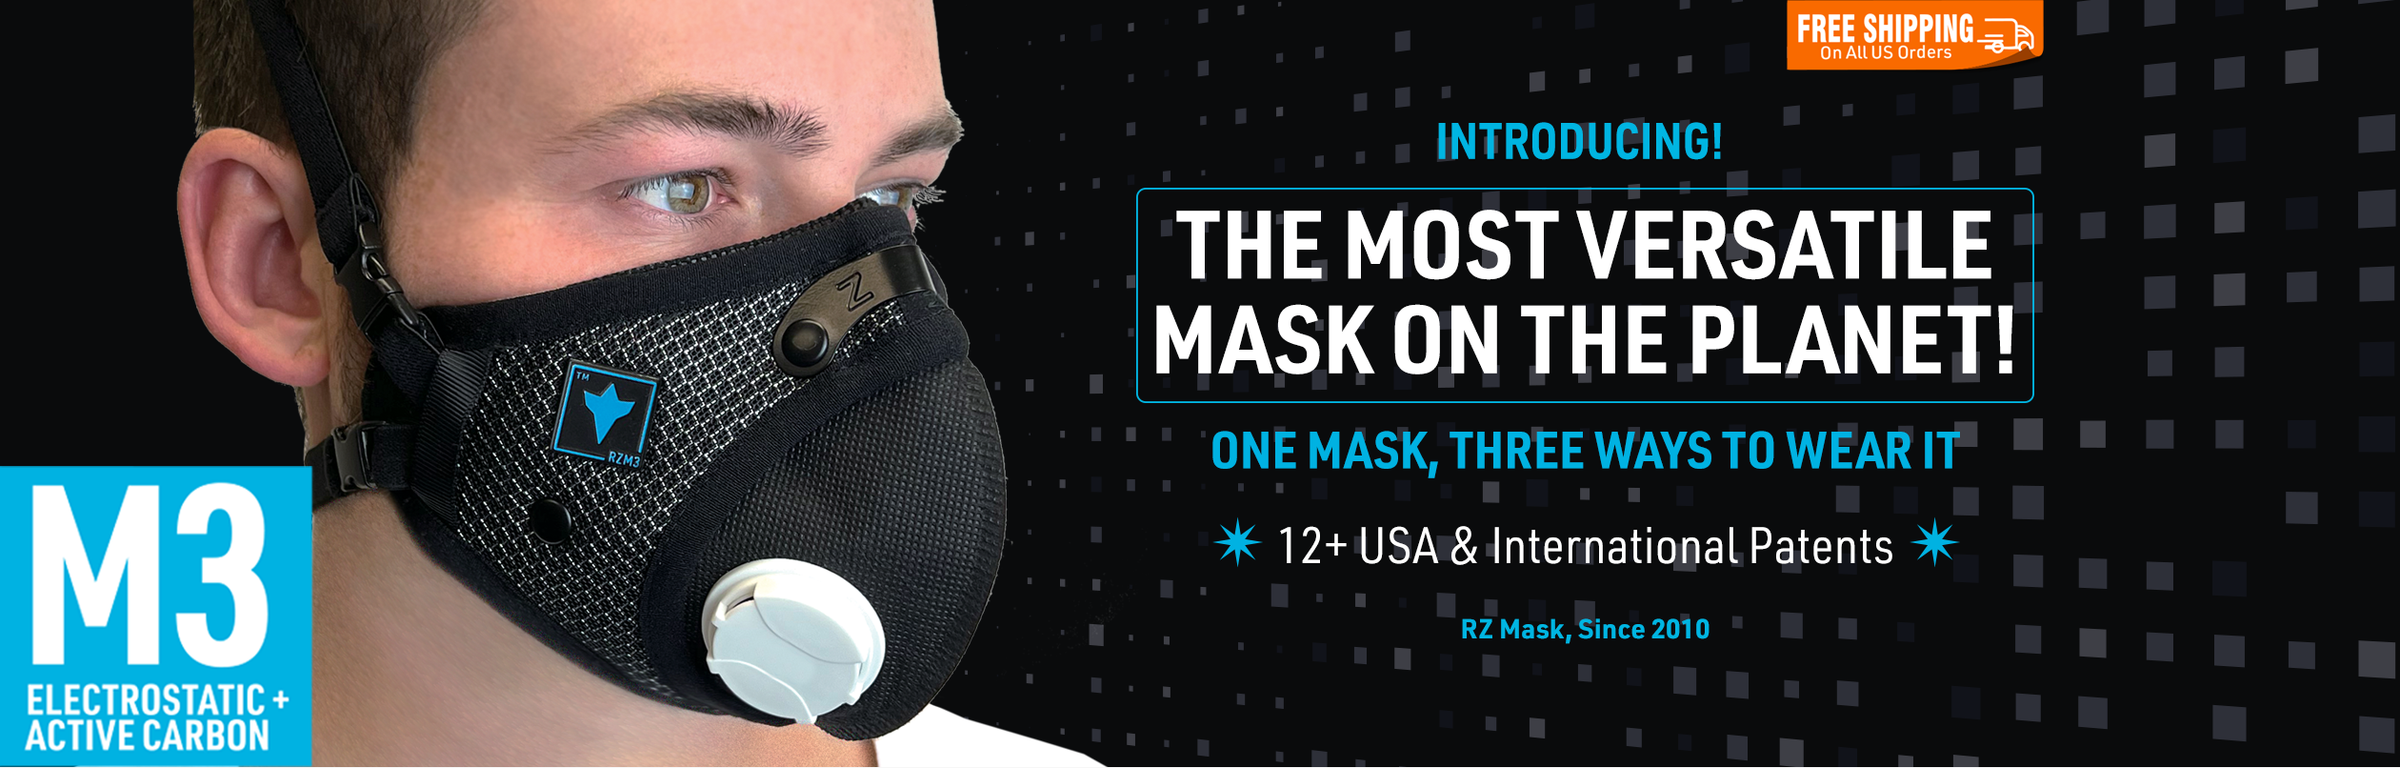 A man wearing the New RZ Mask M3 Mask - The rest of the image announces that the RZ Mask M3 is the most versatile mask on the planet - three different ways to wear it - and it holds 12+ International patents